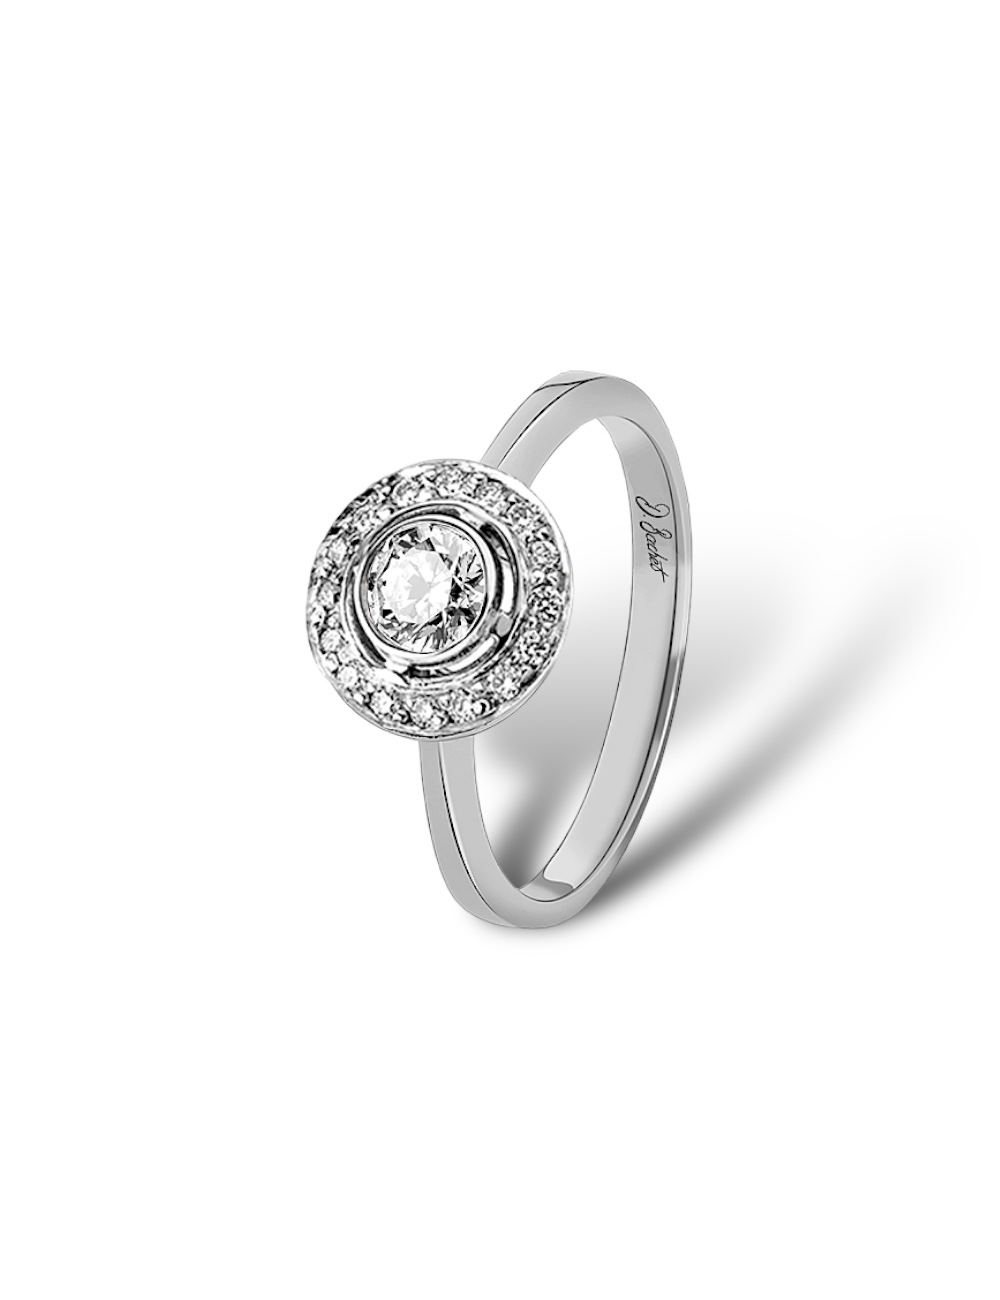 Platinum halo ring with 0.30 ct central white diamond, radiance and eternal love symbol, guaranteed elegance.